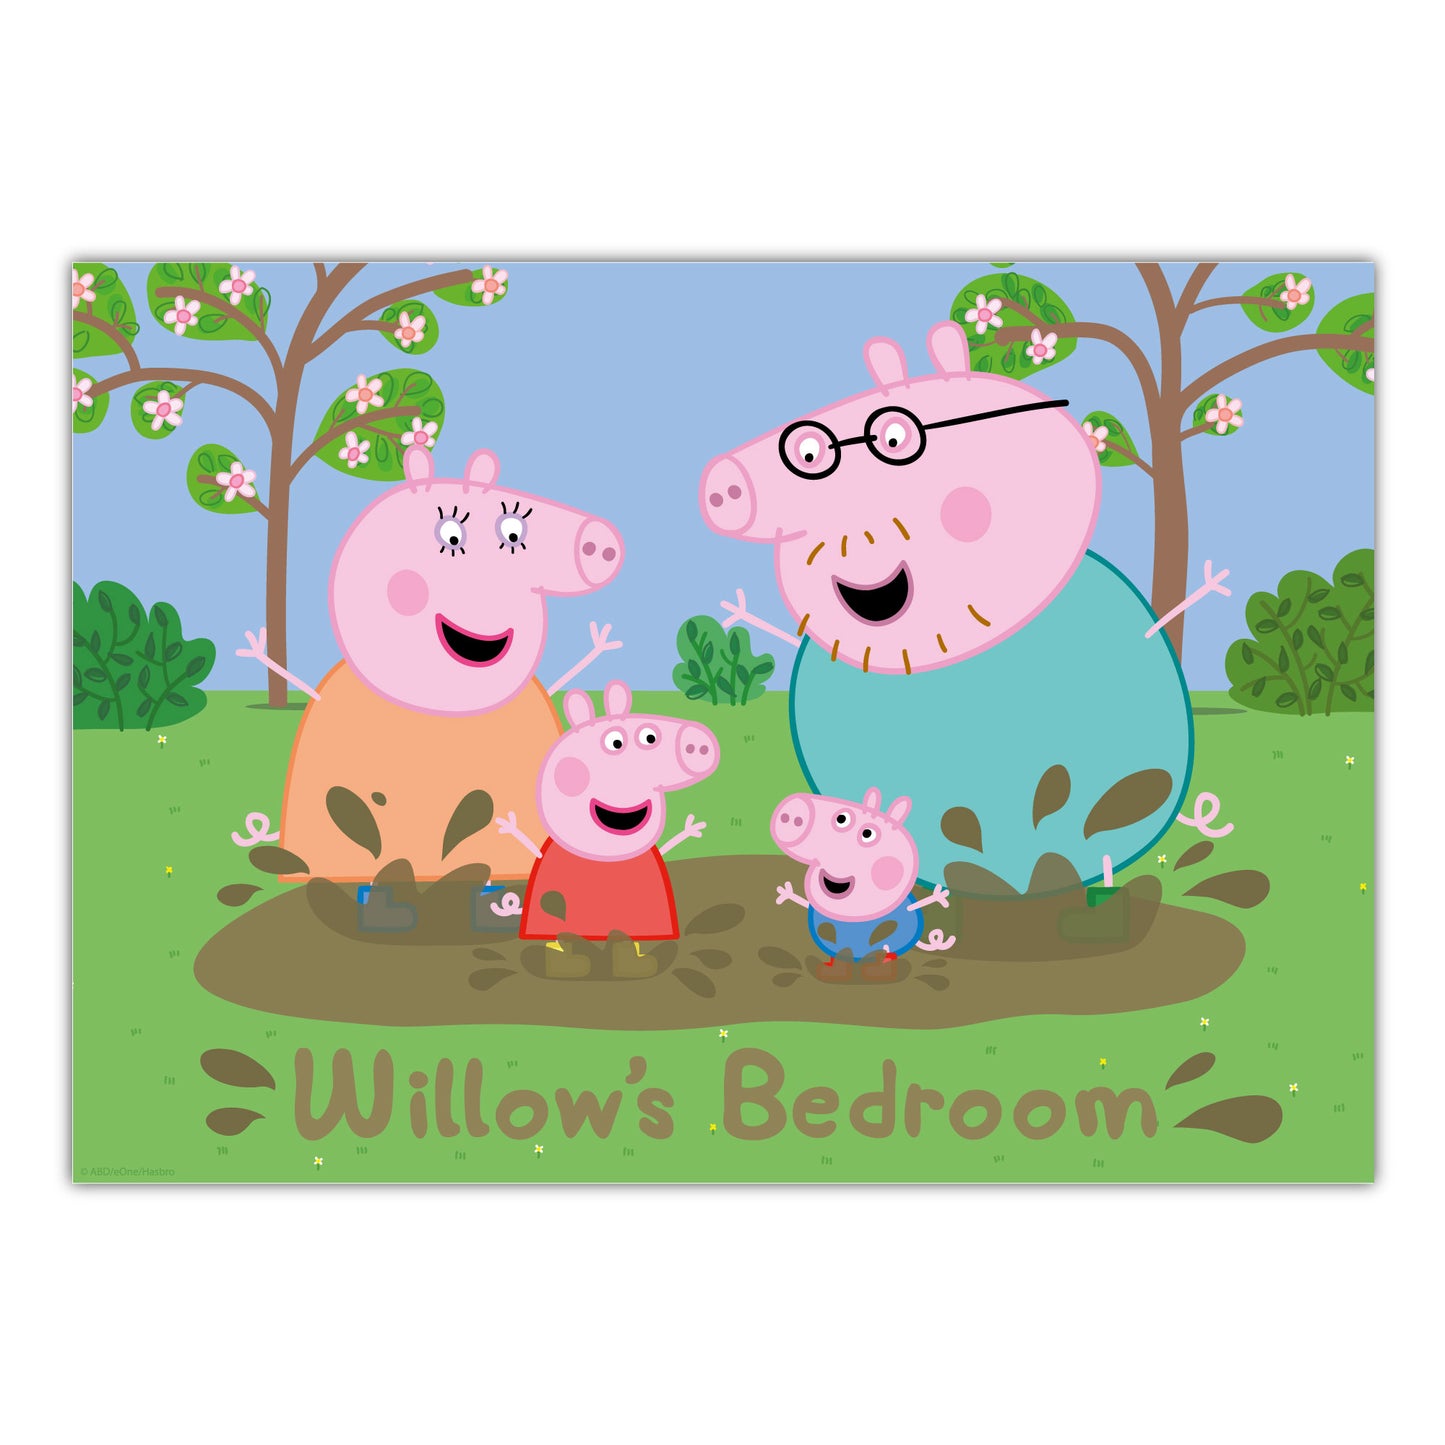 Peppa Pig Print - Peppa and Family Muddy Puddle Personalised Name Poster Wall Art